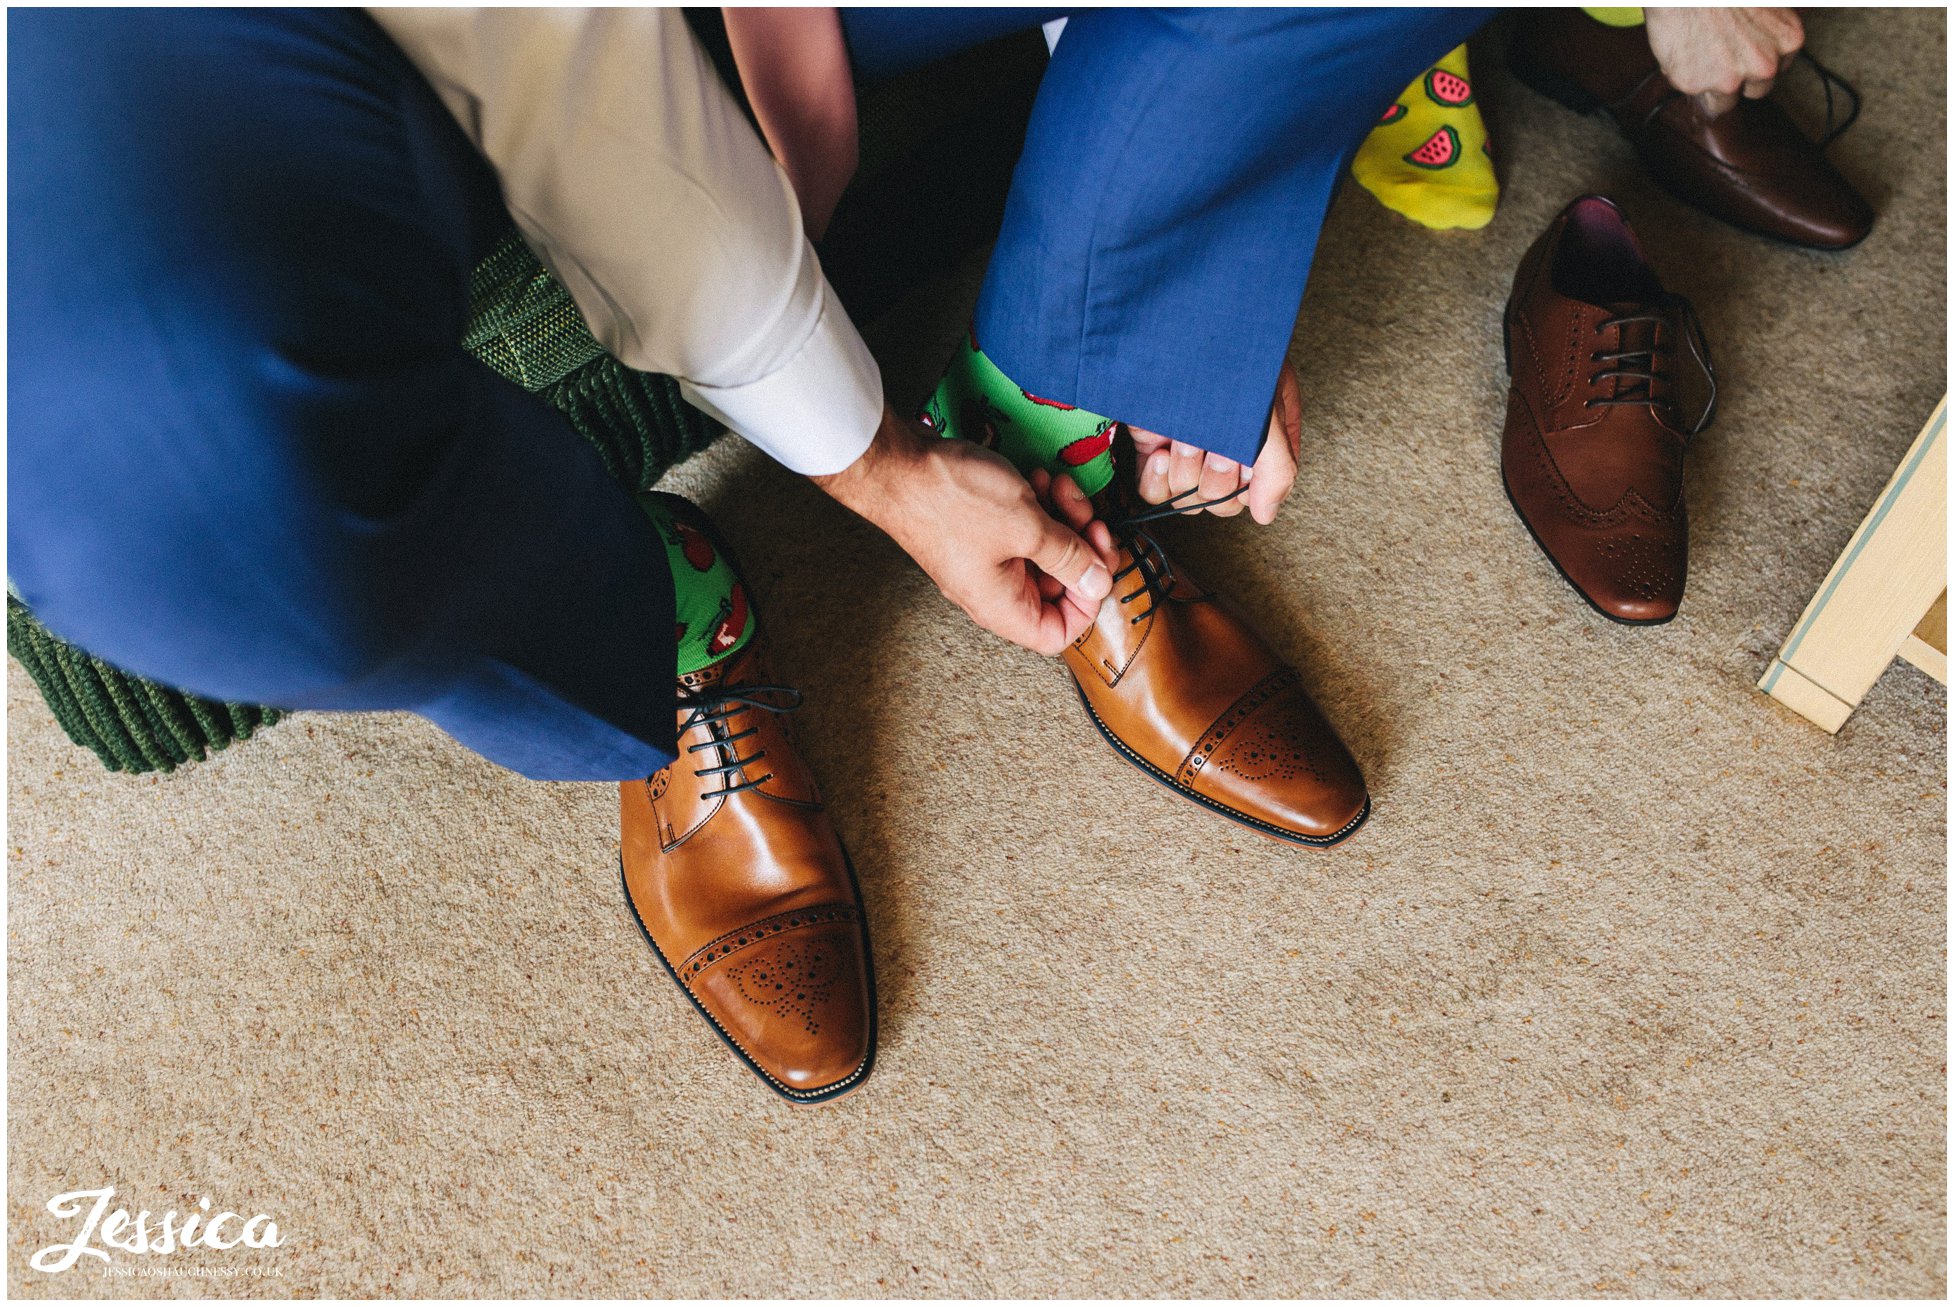 the groom puts on his shoes over brightly coloured socks